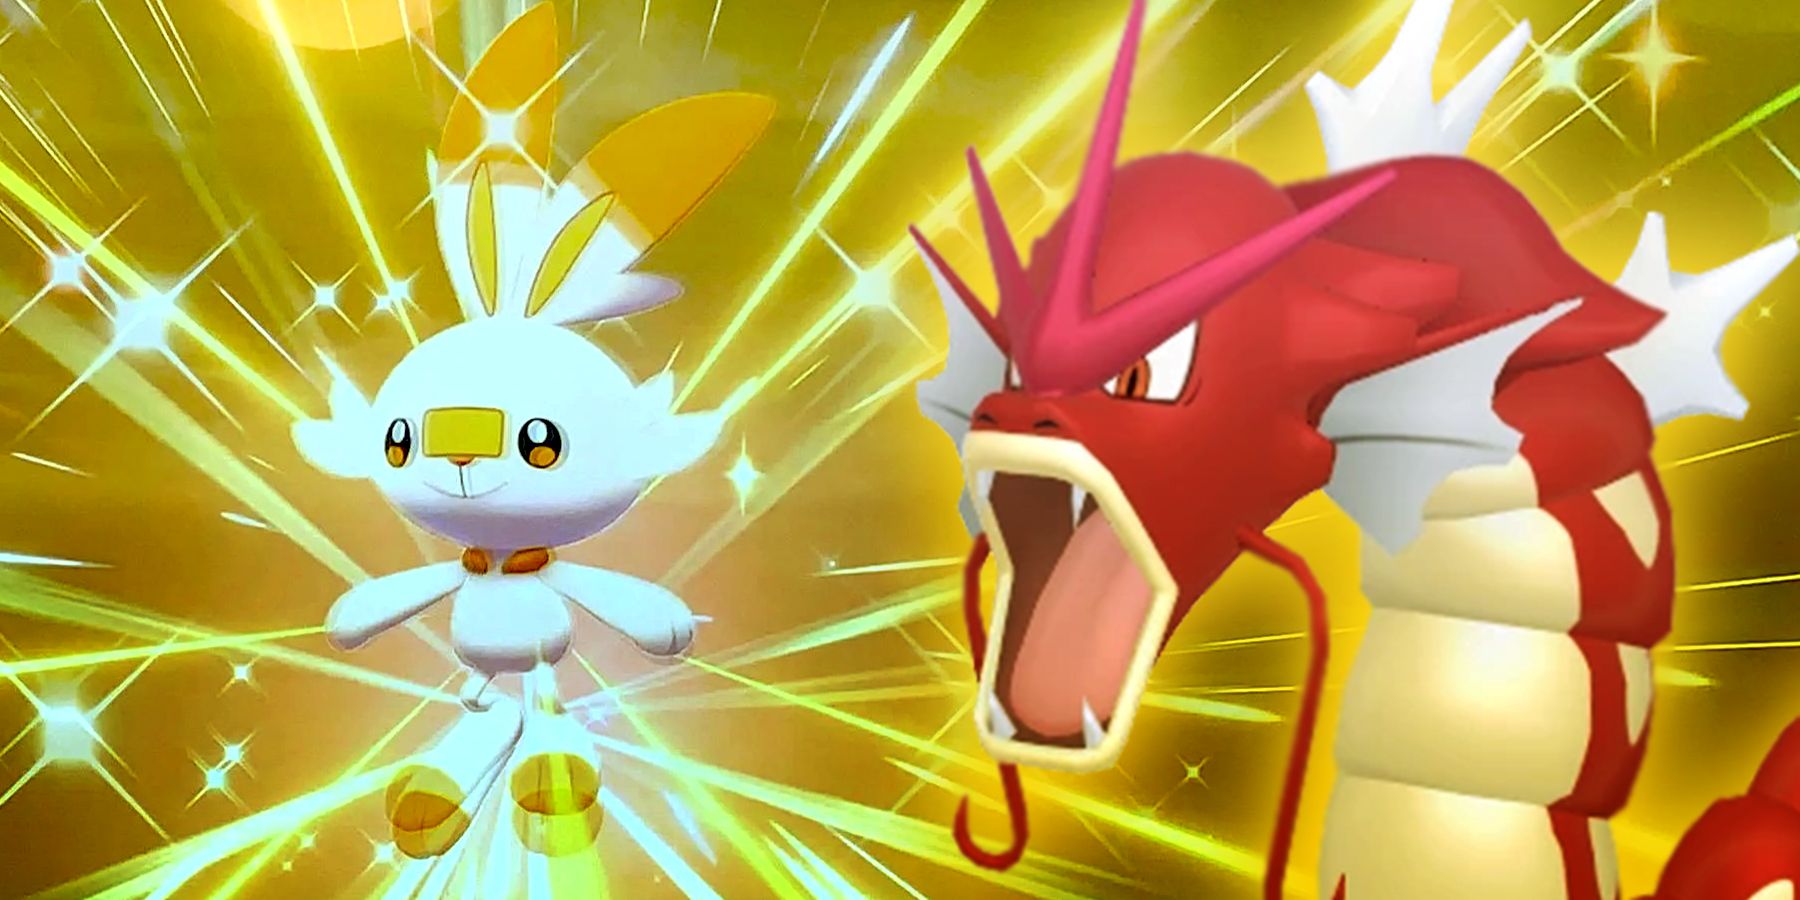 11 best shiny Pokémon, Which shinies are the coolest?